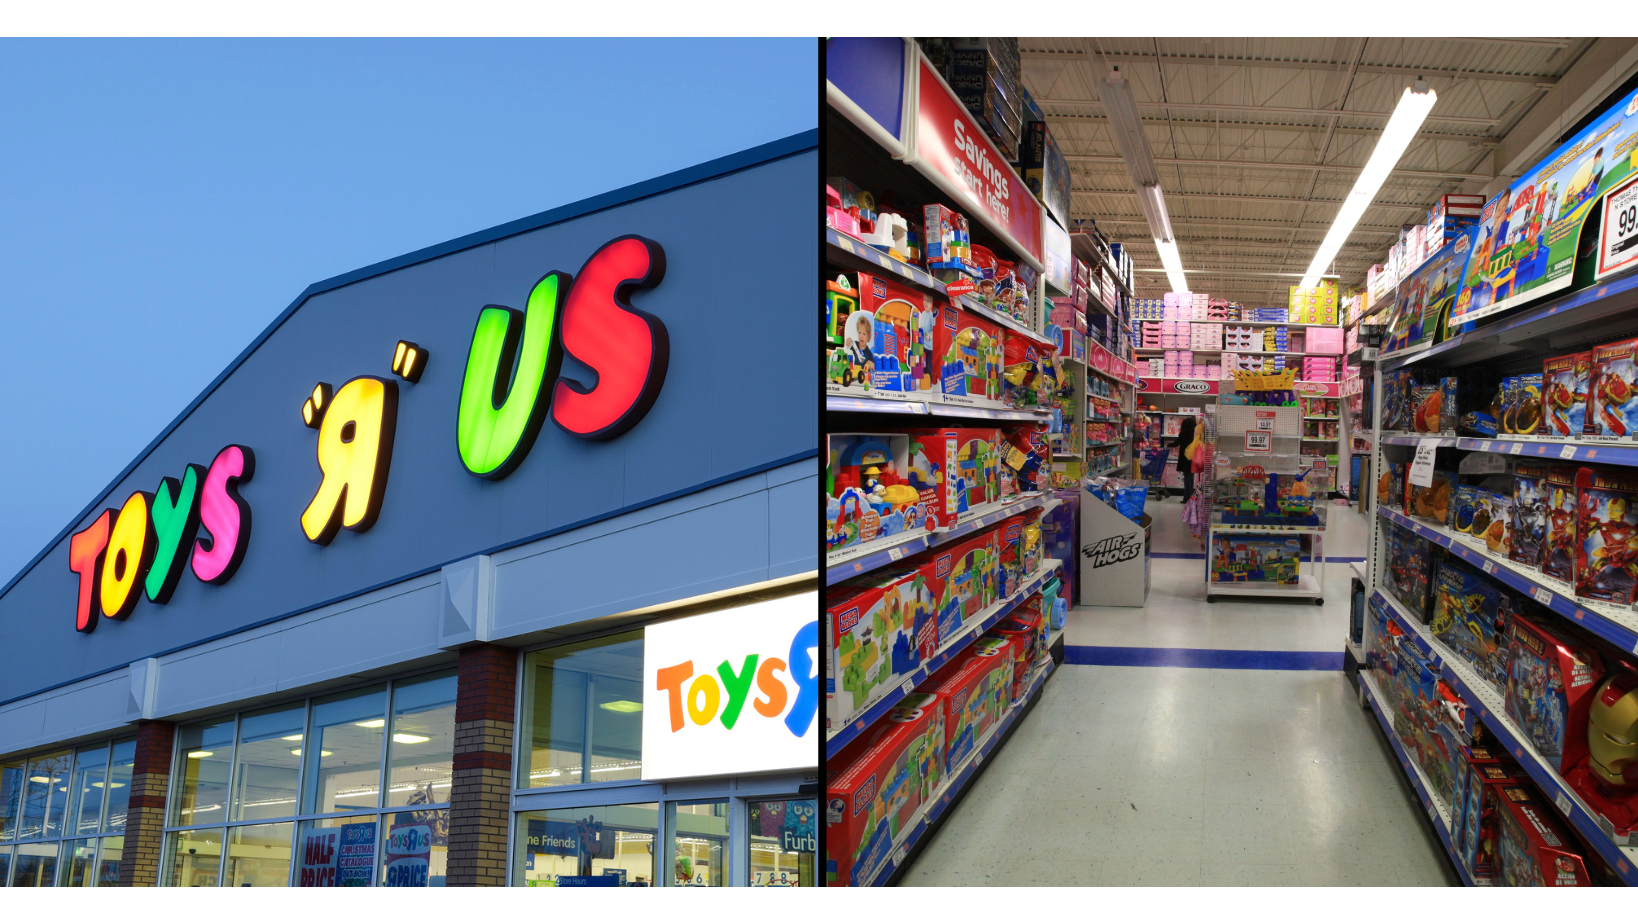 Toys R Us returns to UK after five years with new website